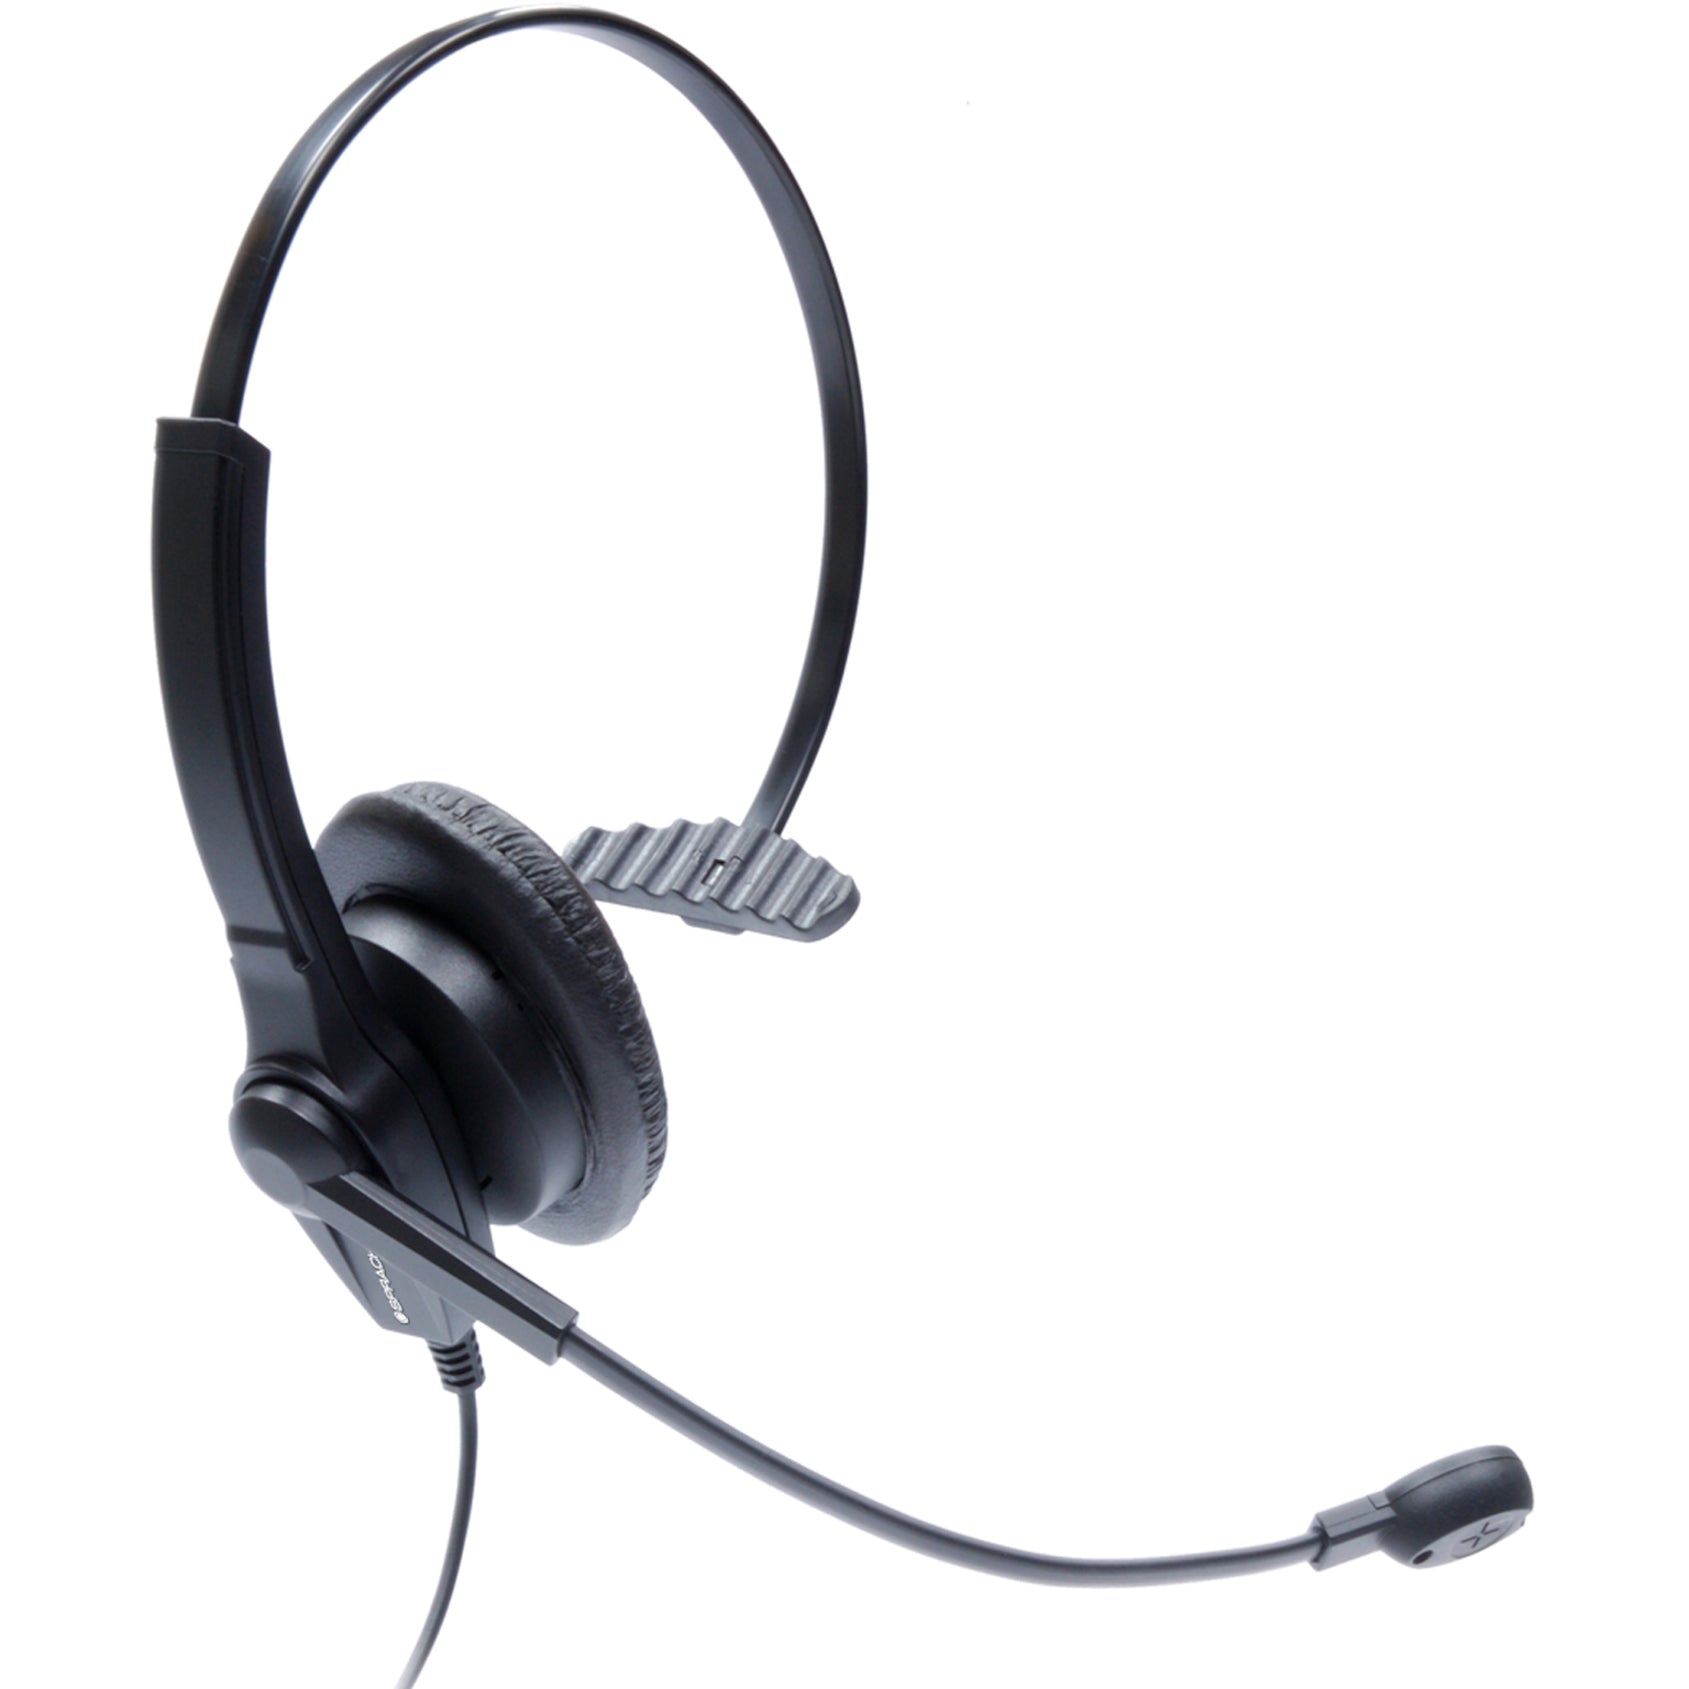 Spracht ZUMUC1 Z?M UC1 Headset, Monaural Over-the-head USB Wired Headset with Flexible Microphone, Comfortable and Durable, Noise Canceling, 1 Year Limited Warranty